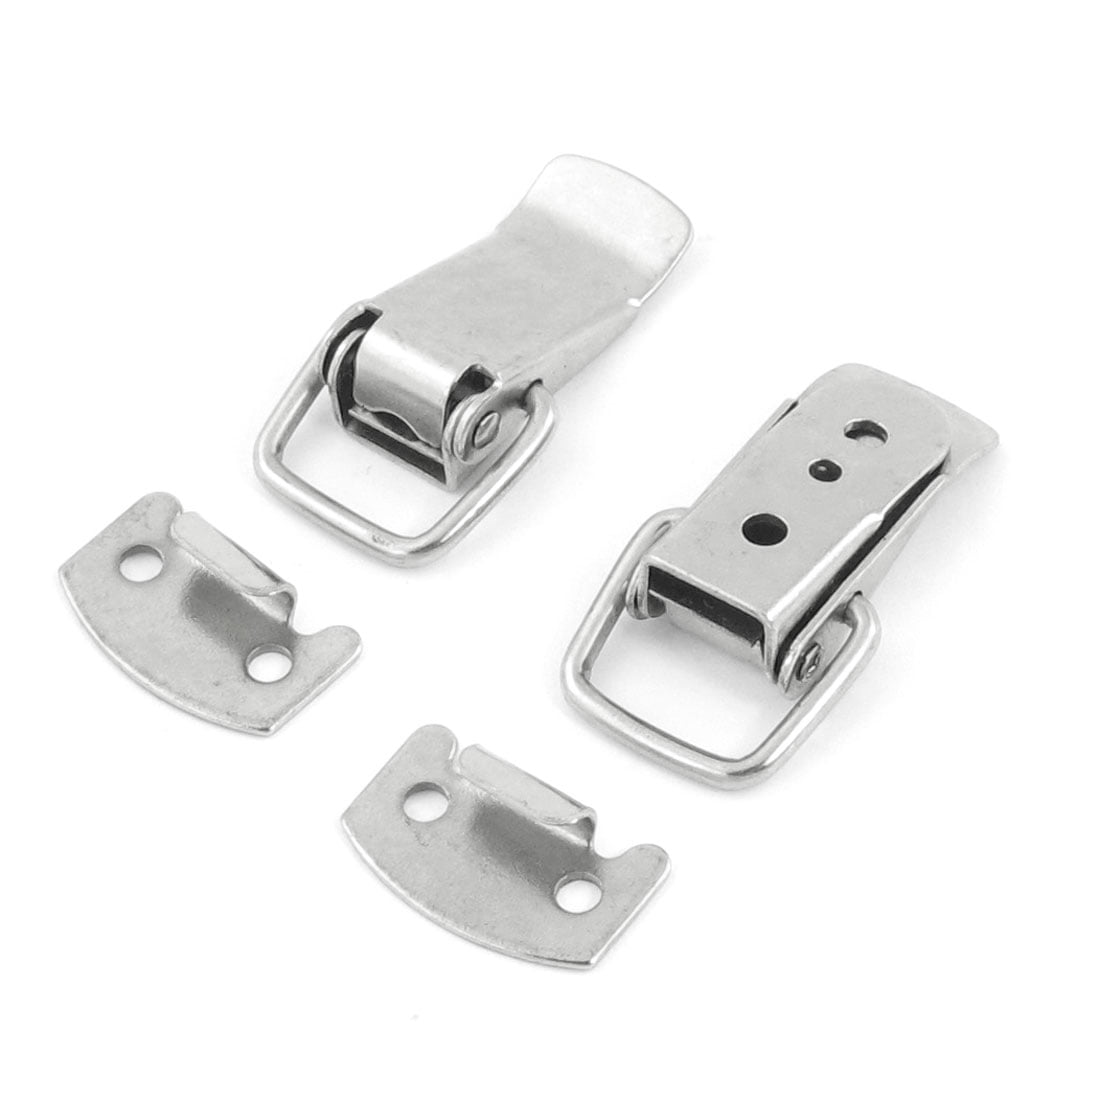 4 Box Chest Case Spring Loaded Stainless Steel Draw Toggle Latch Hasp 